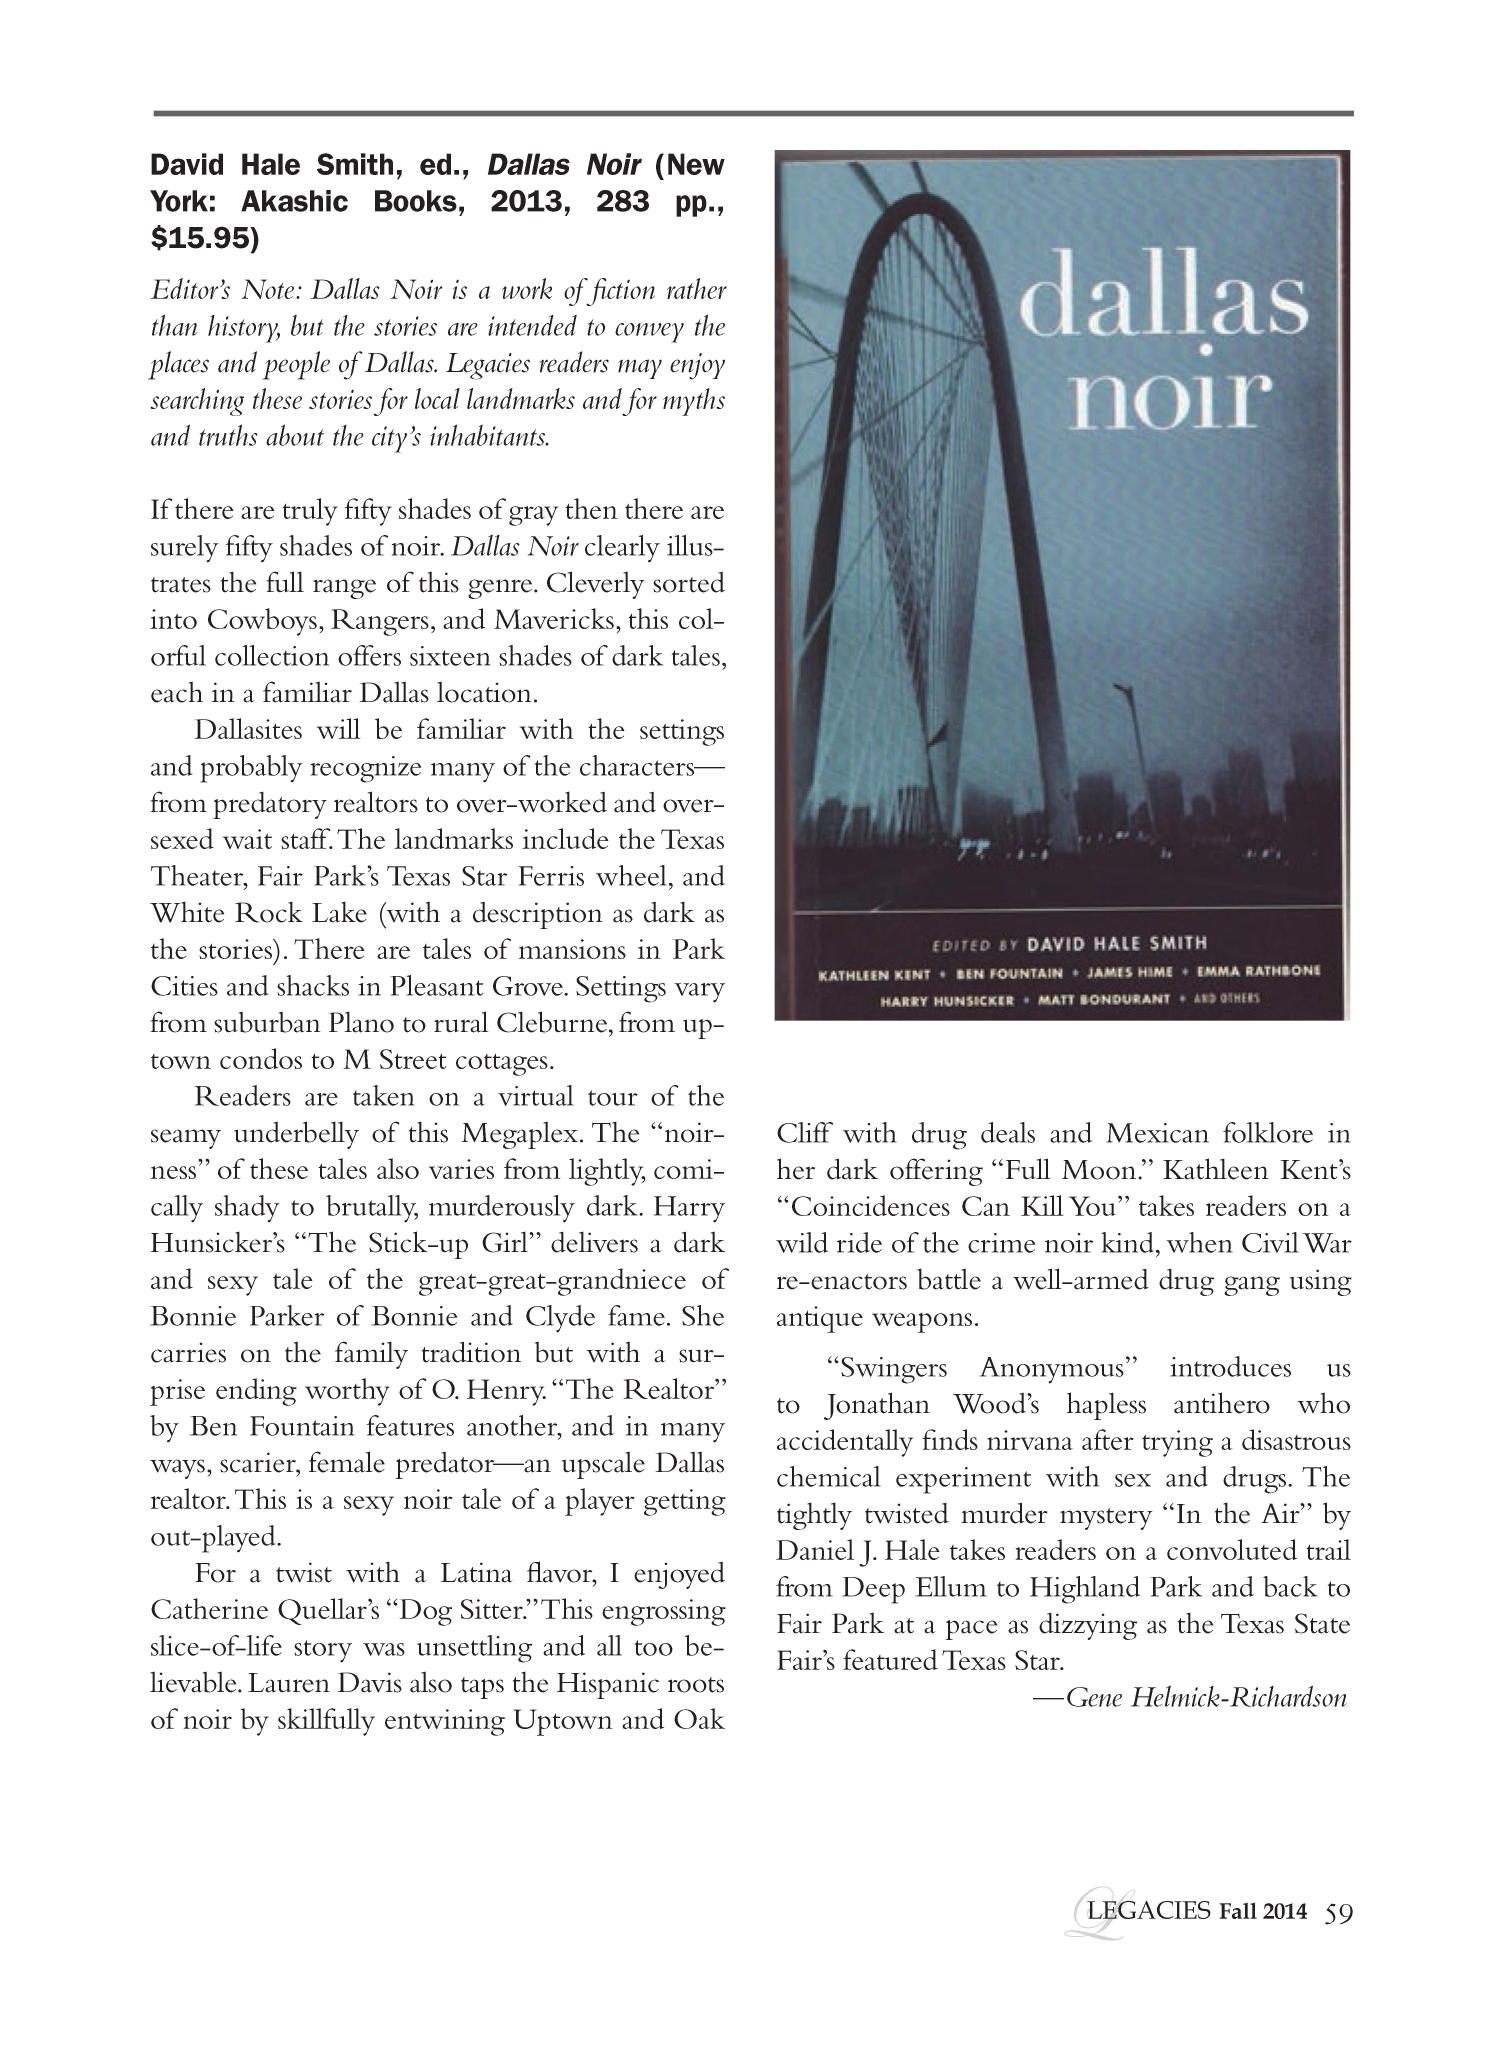 Legacies A History Journal for Dallas and North Central Texas, Volume 26, Number 2, Fall 2014